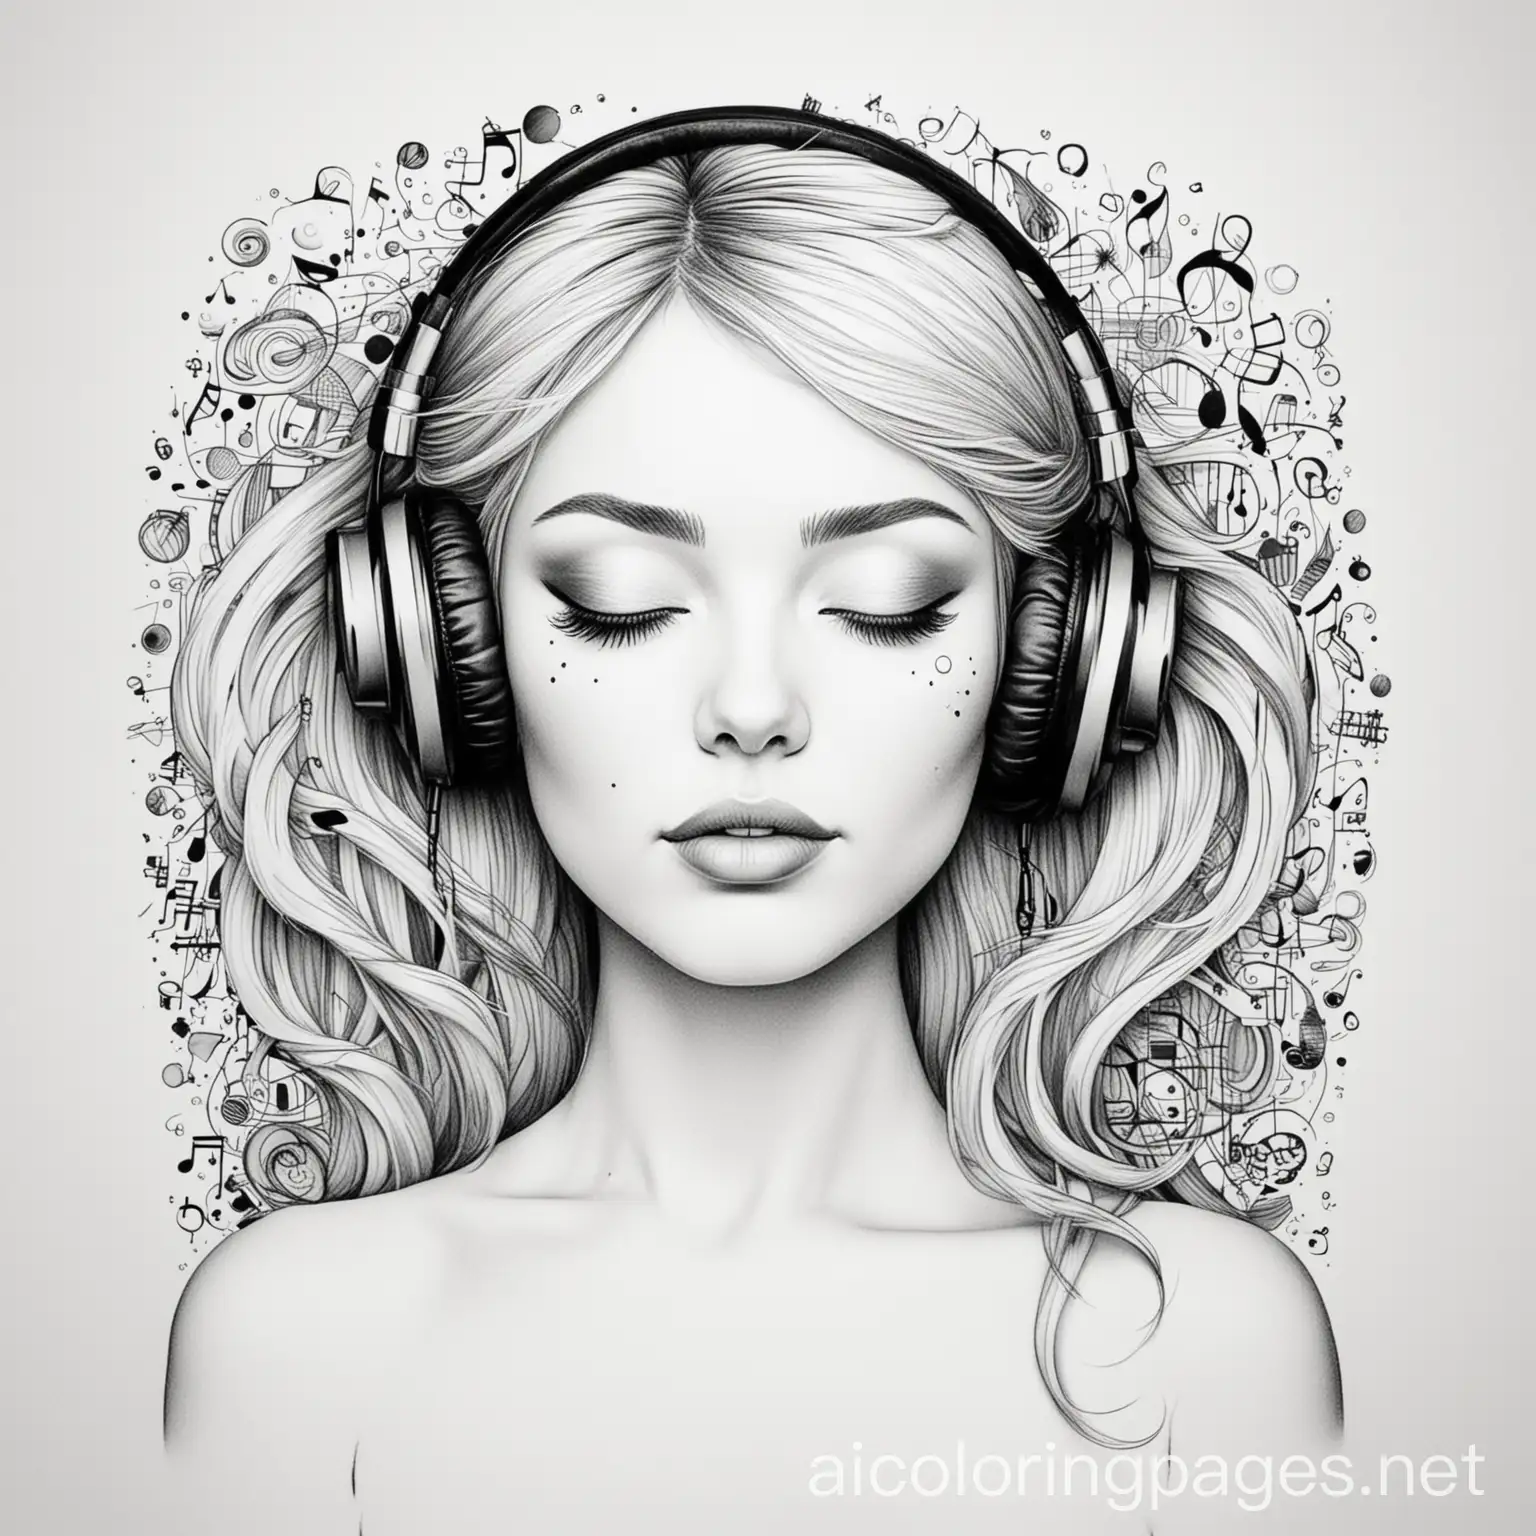 Soothing-Music-Coloring-Page-Relaxing-Black-and-White-Line-Art-on-White-Background